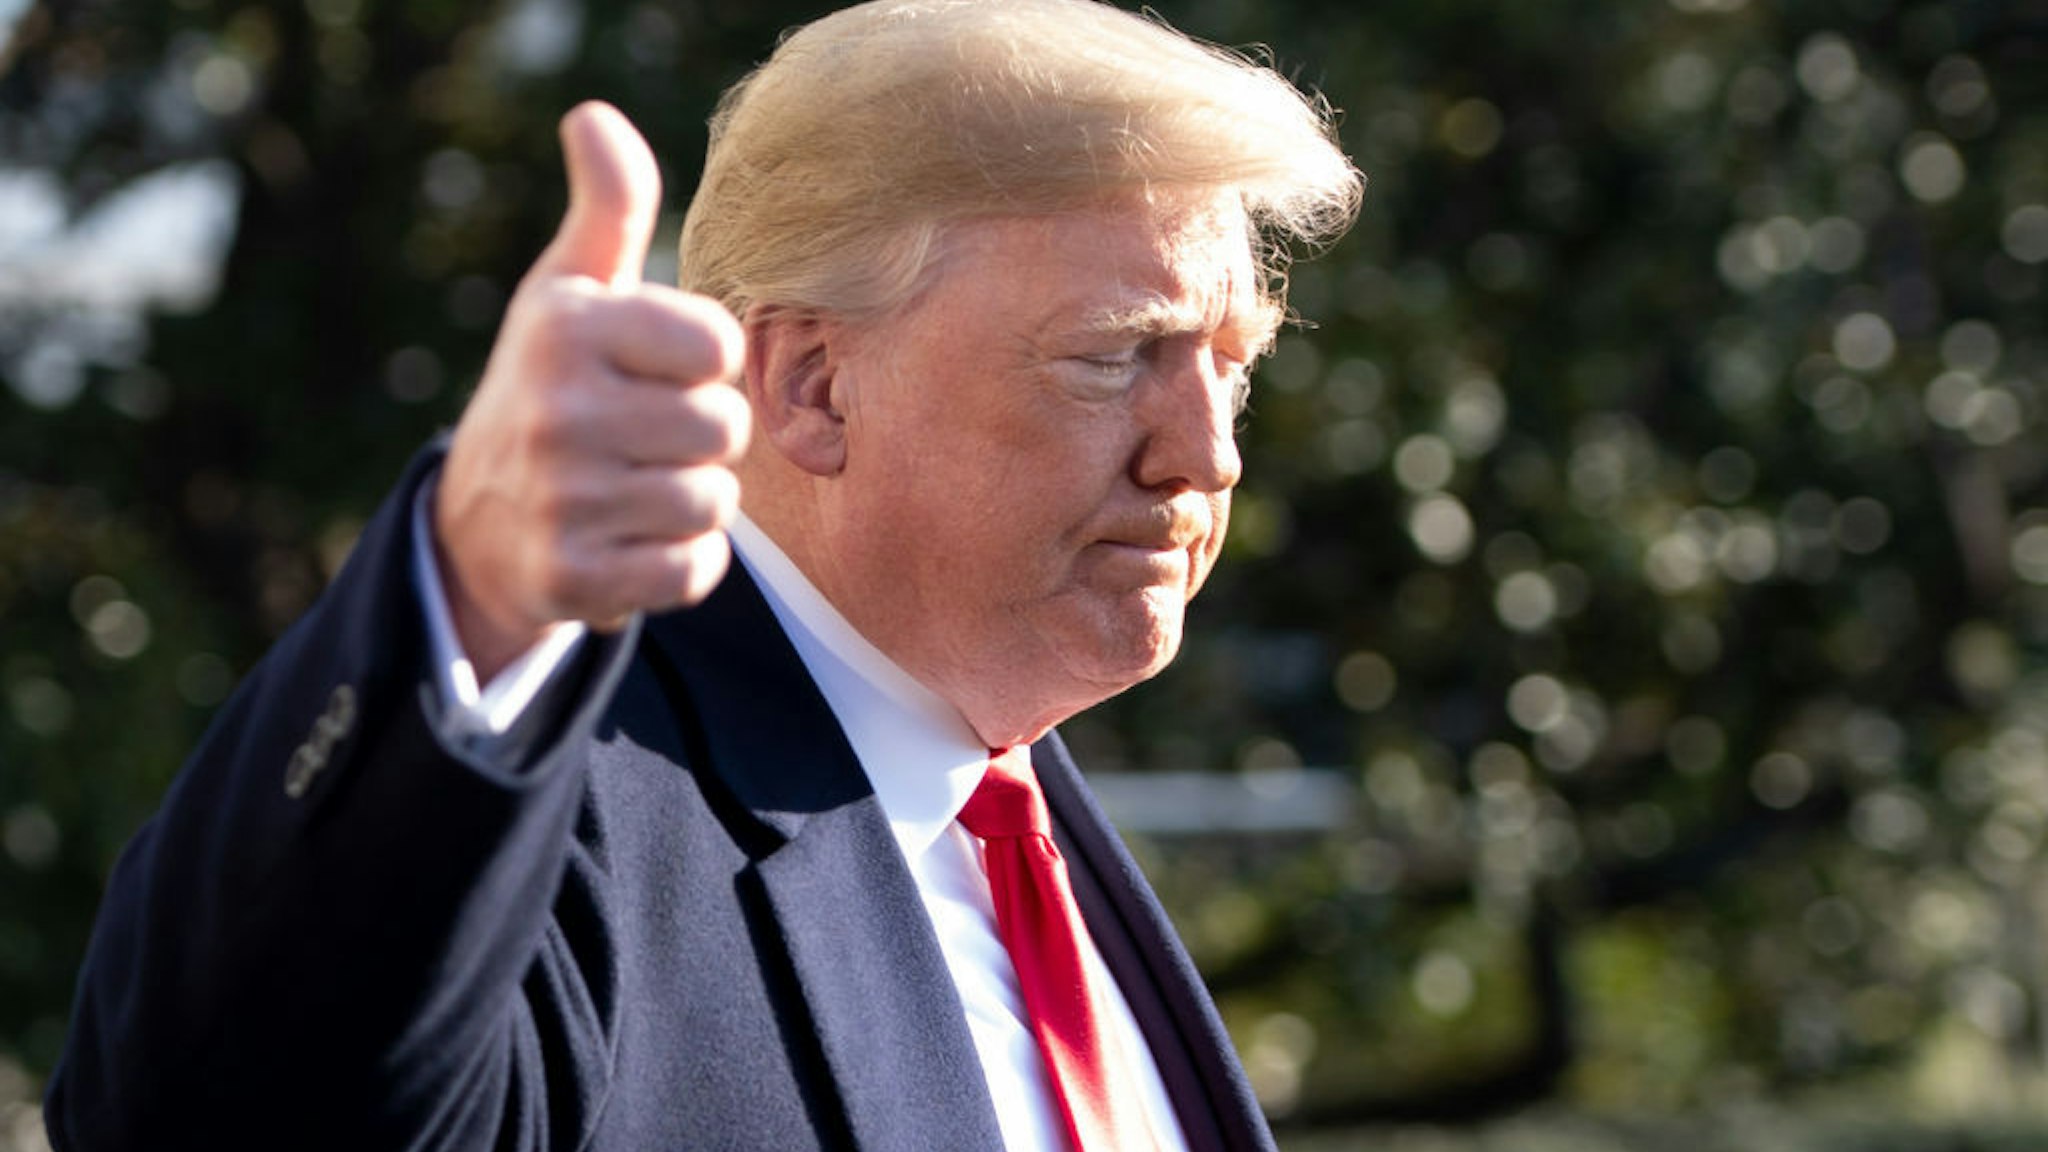 US President Donald Trump gives a thumbs-up as he speaks to the press as he walks to Marine One prior to departing from the South Lawn of the White House in Washington, DC, December 7, 2018.